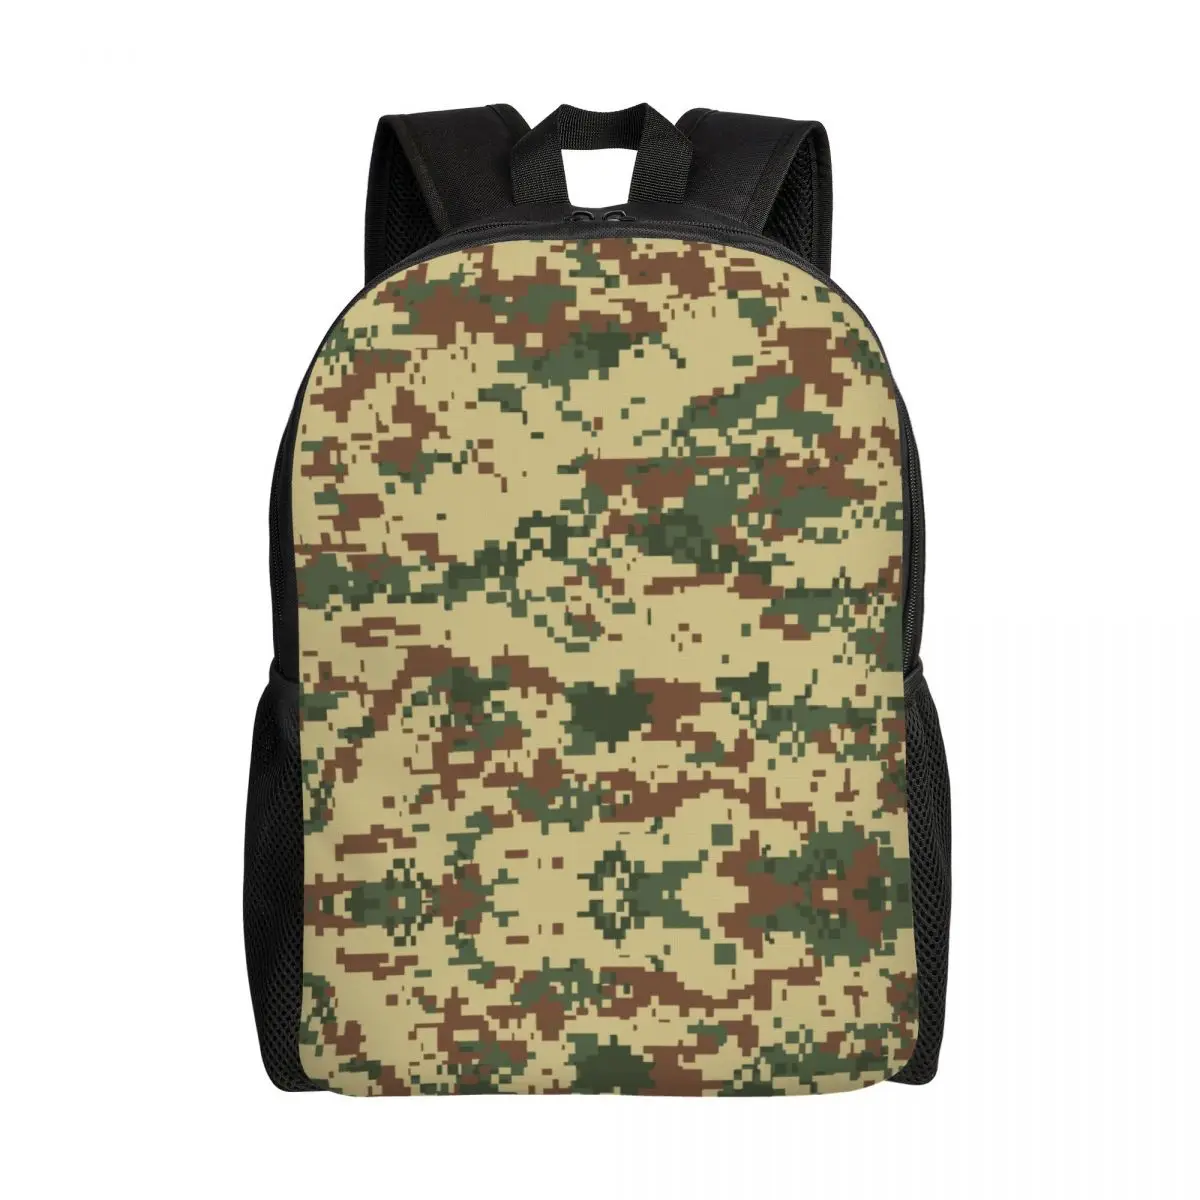 

Vintage Camo Backpacks for Men Women College School Student Bookbag Fits 15 Inch Laptop Military Army Camouflage Bags